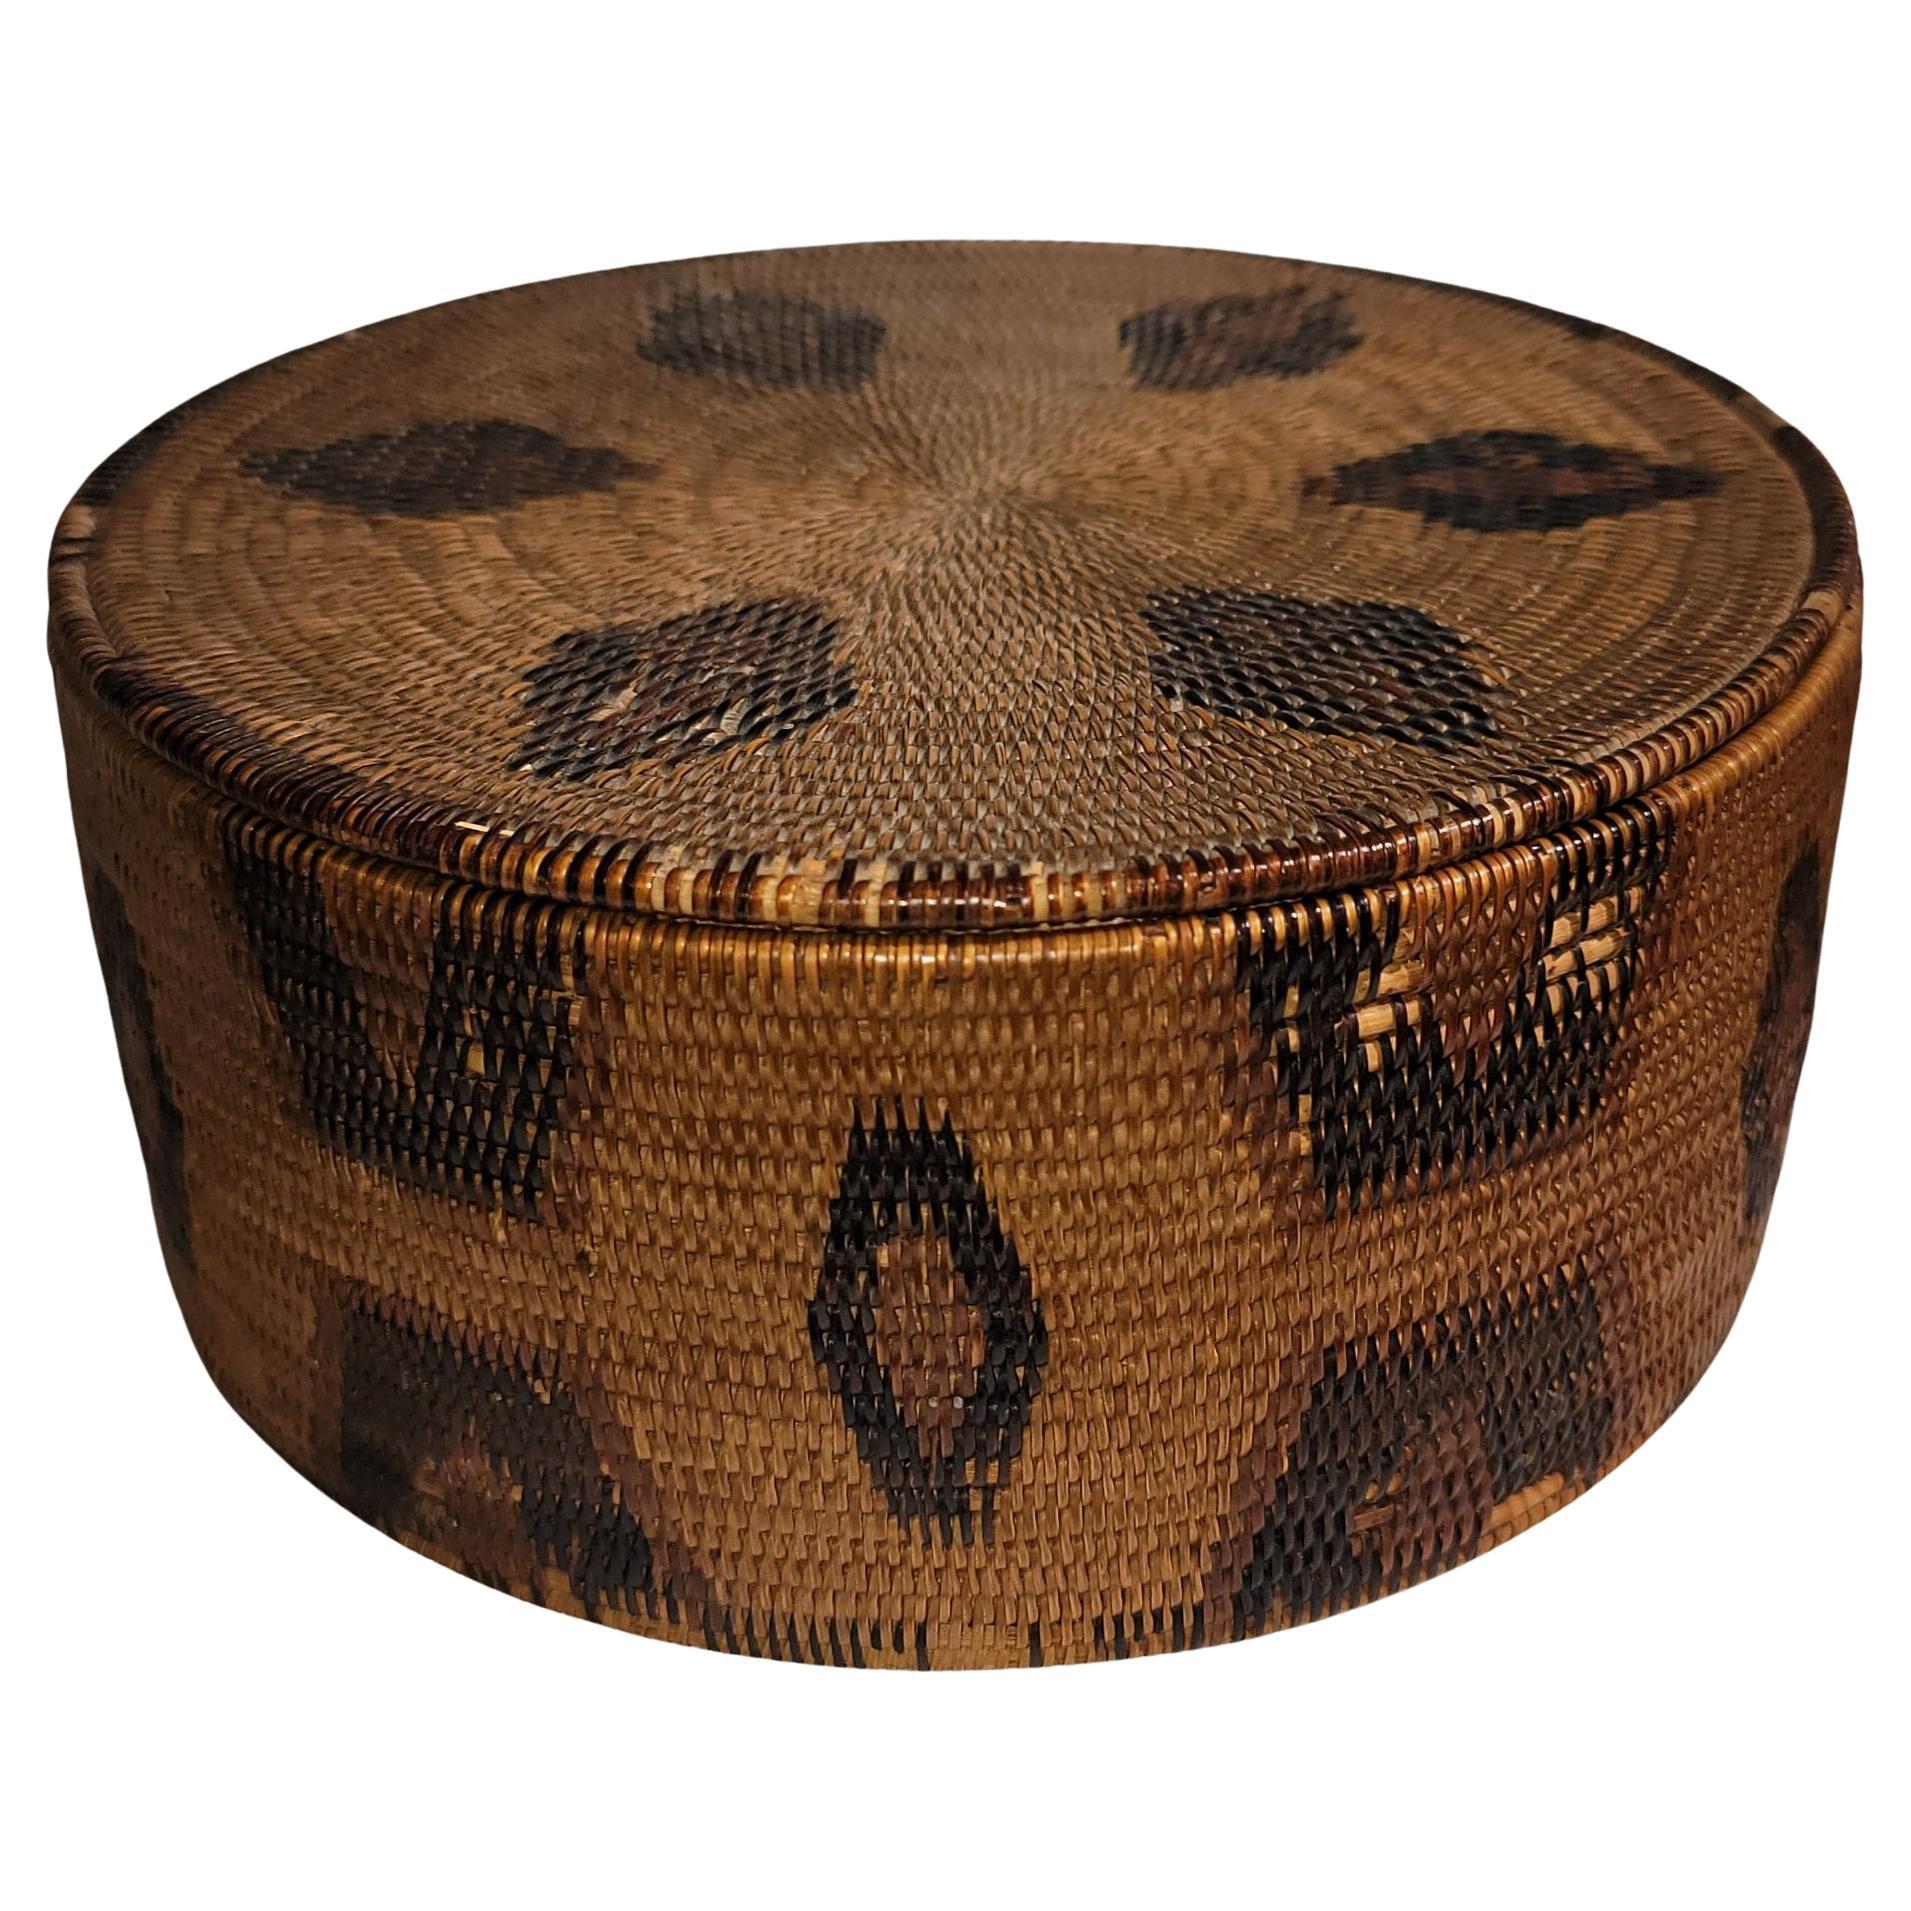 Early 19thc American Indian Lidded Basket